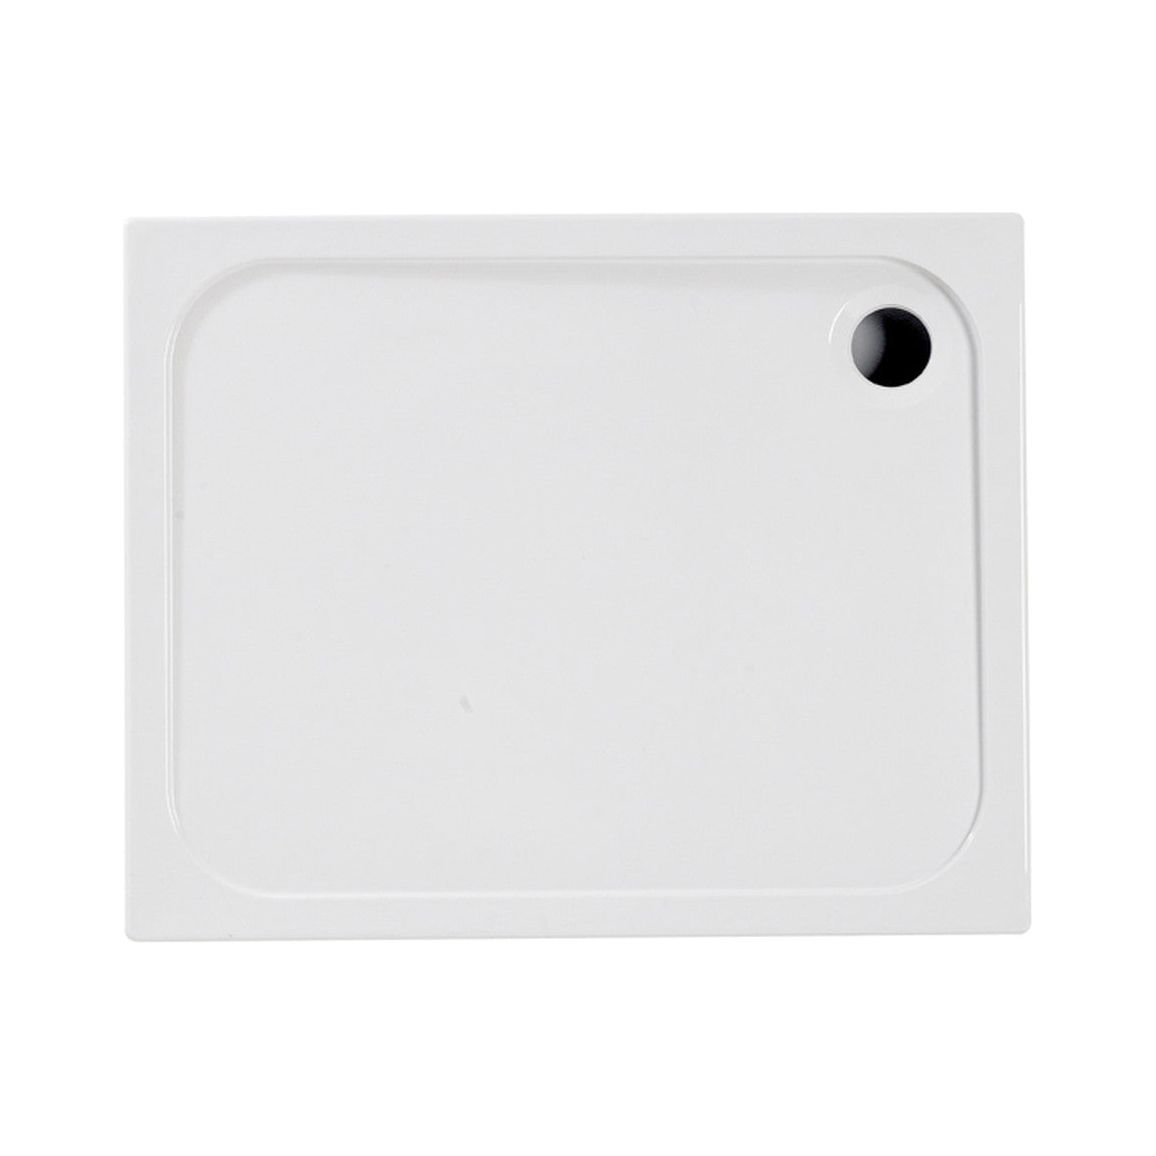 45mm Low Profile 900x760mm Rectangular Tray & Waste